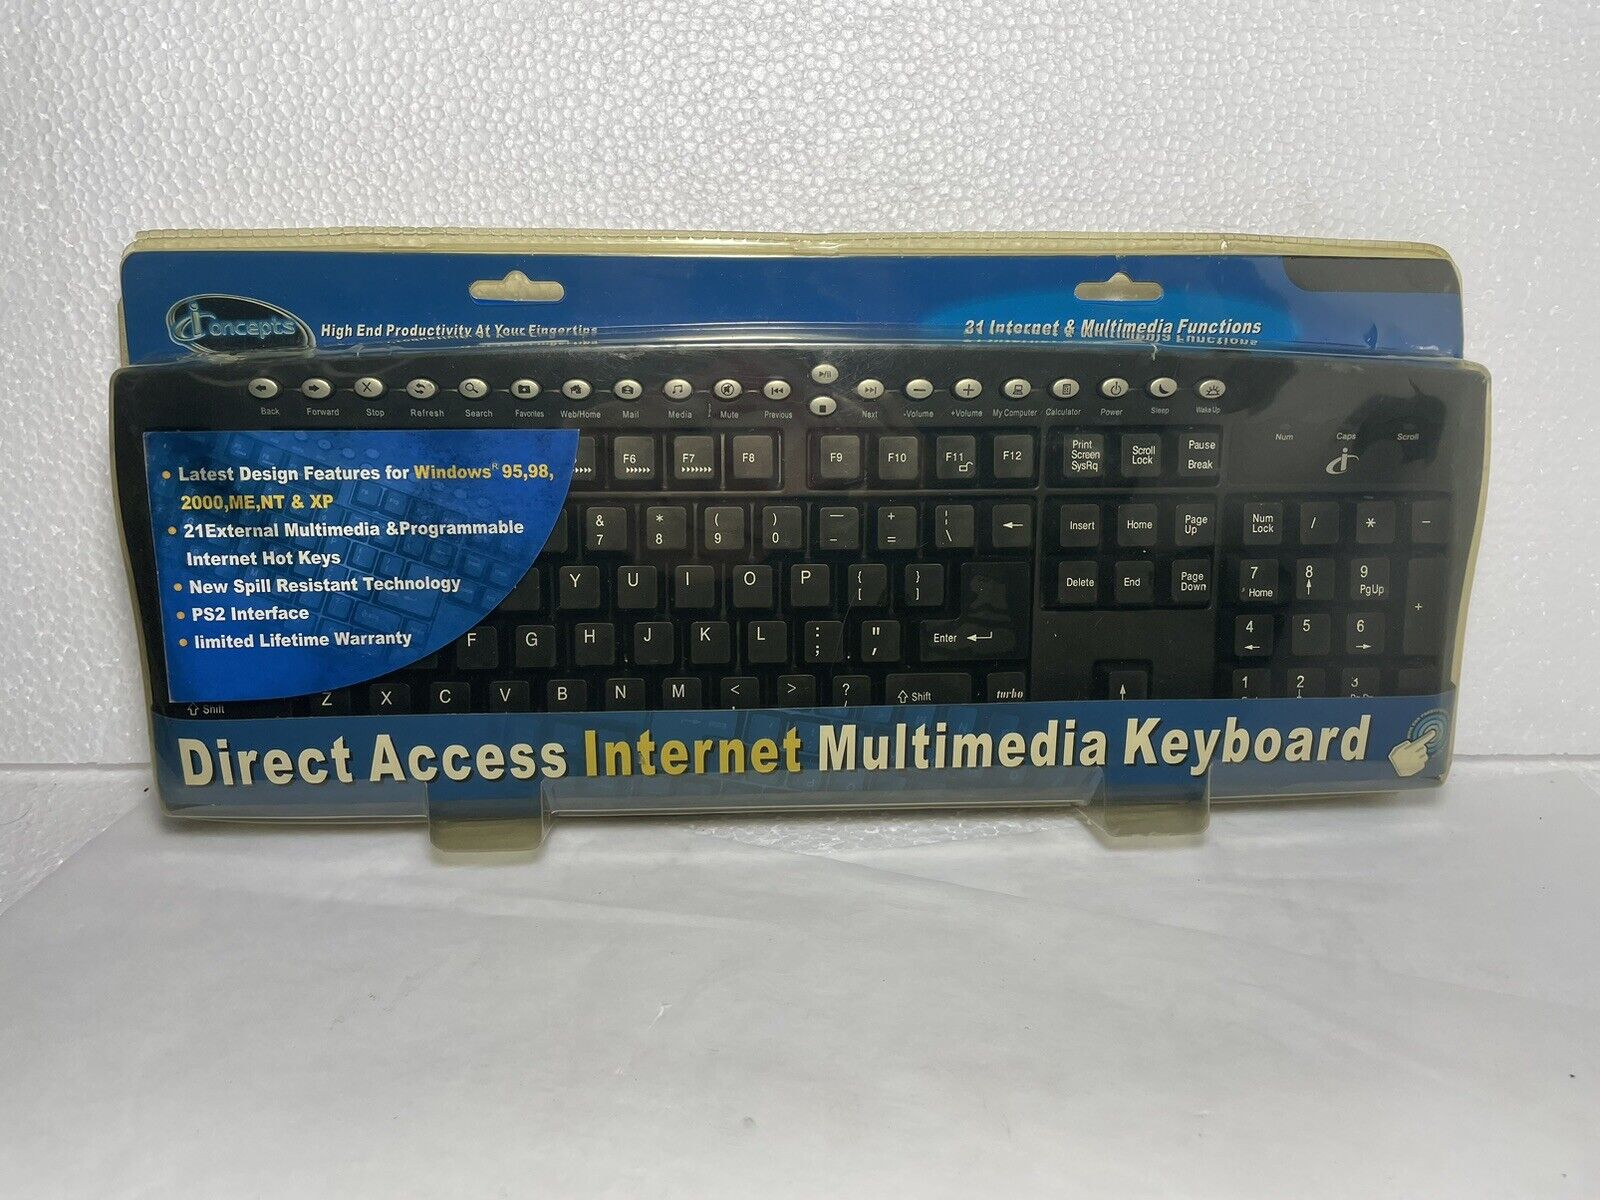 Vintage 2003 IConcepts Direct Access Internet Multimedia Keyboard New